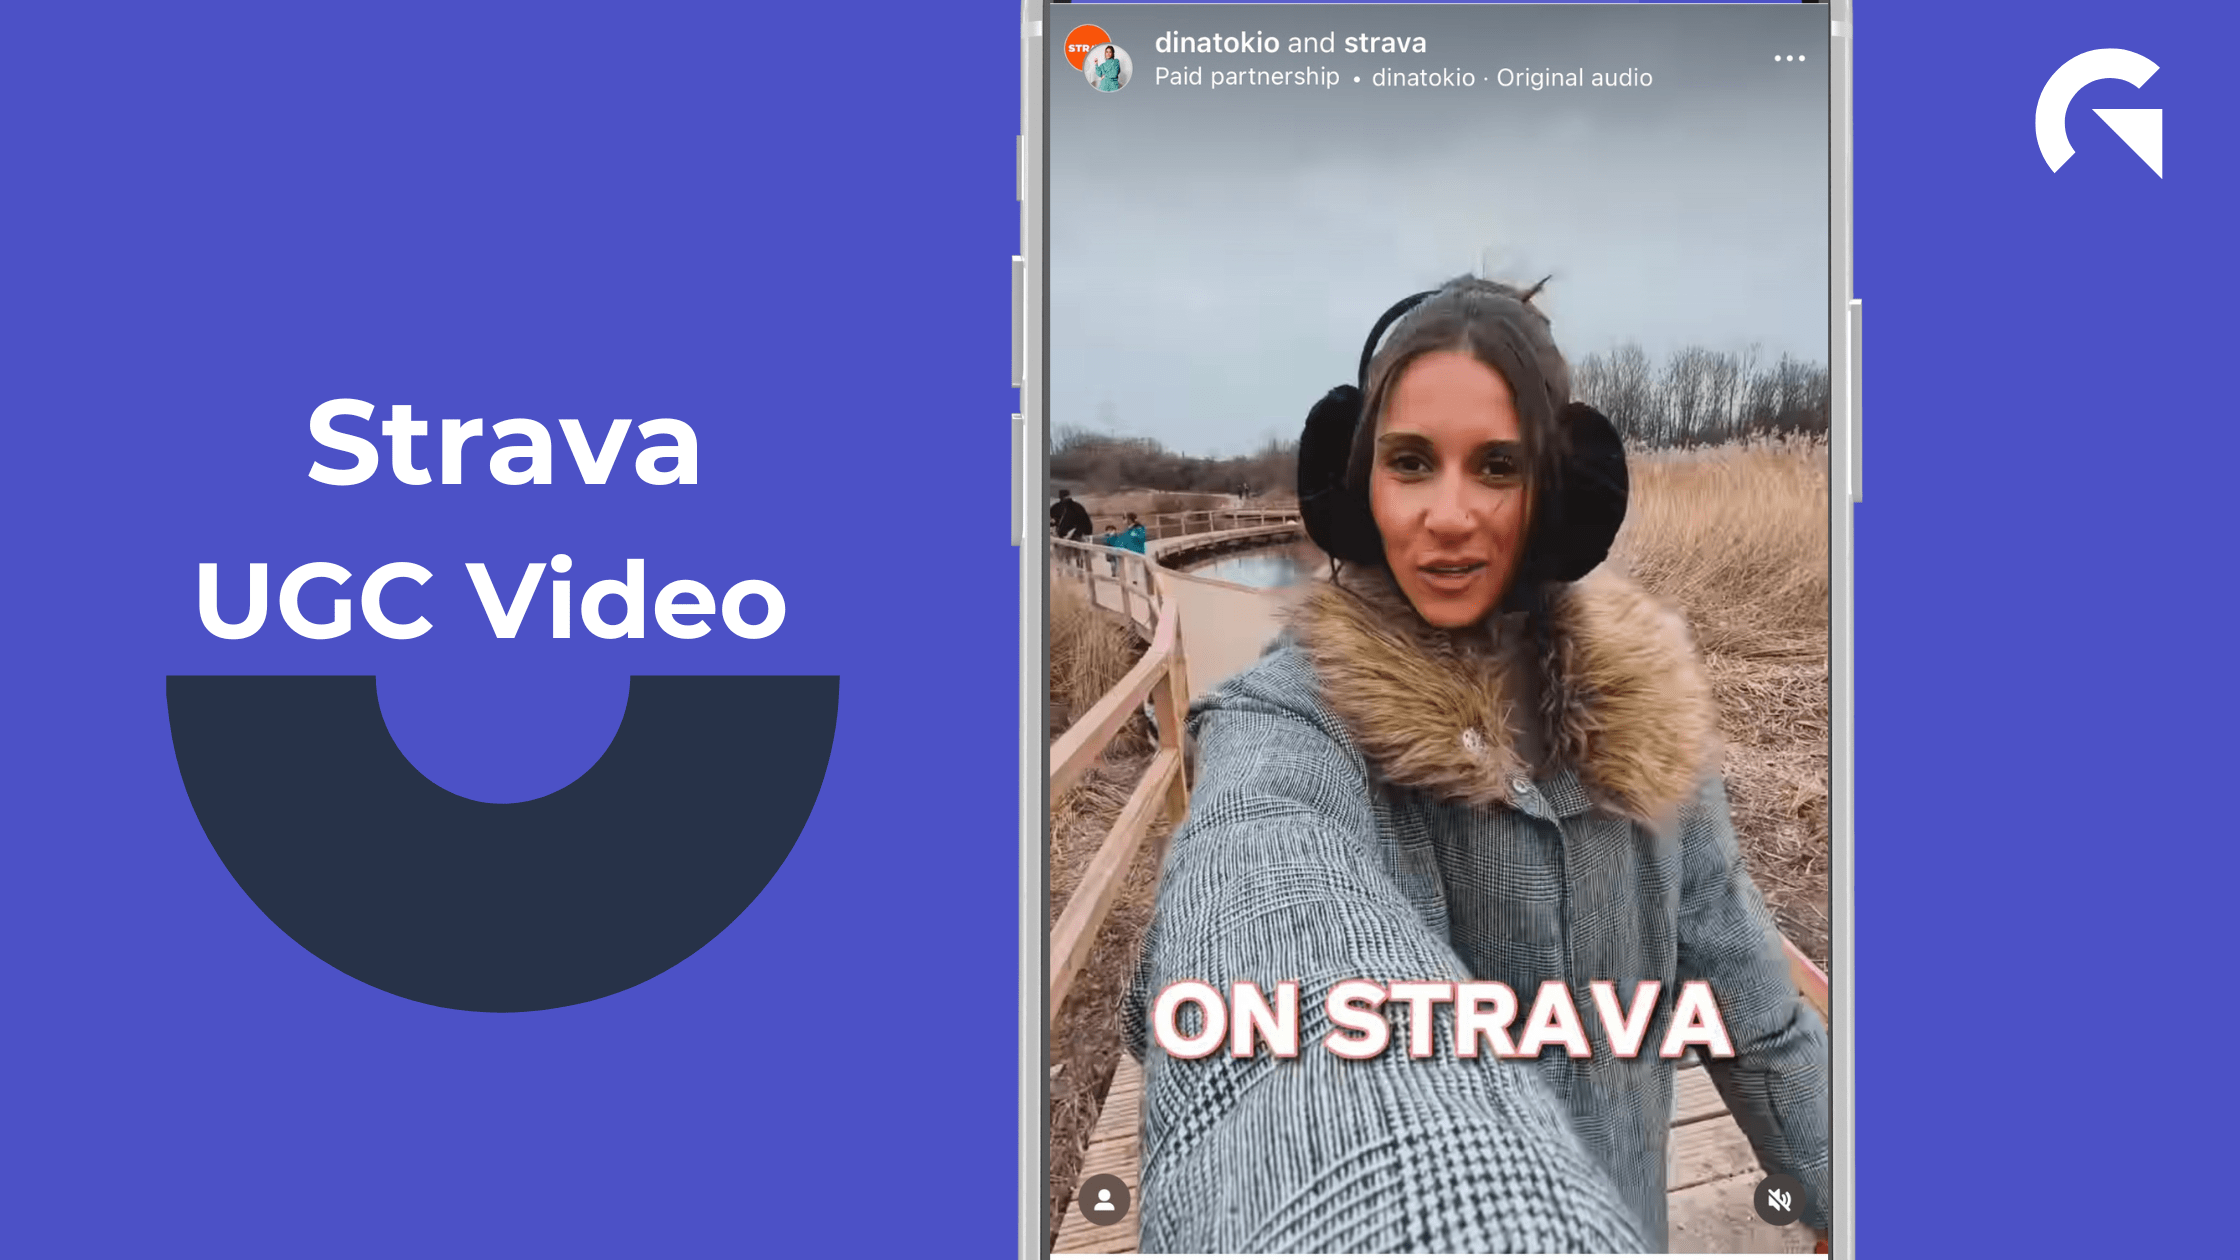 A half-page image with the text "Stava UGC Video" with an image of a woman facing the camera wearing a grey sweater with earmuffs, with the caption "on strava"